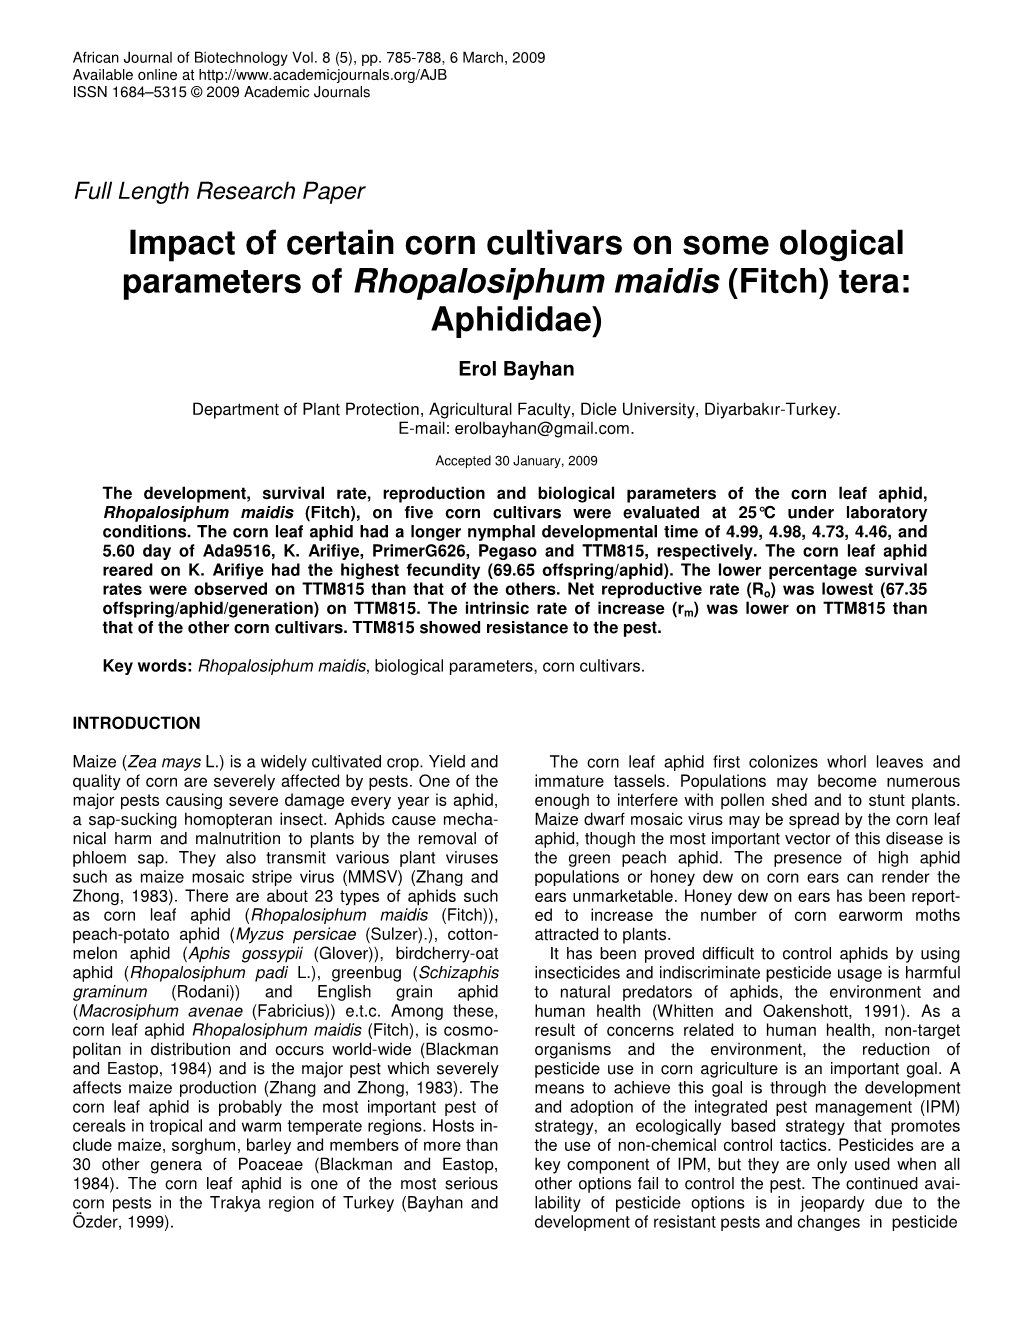 Impact of Certain Corn Cultivars on Some Ological Parameters of Rhopalosiphum Maidis (Fitch) Tera: Aphididae)